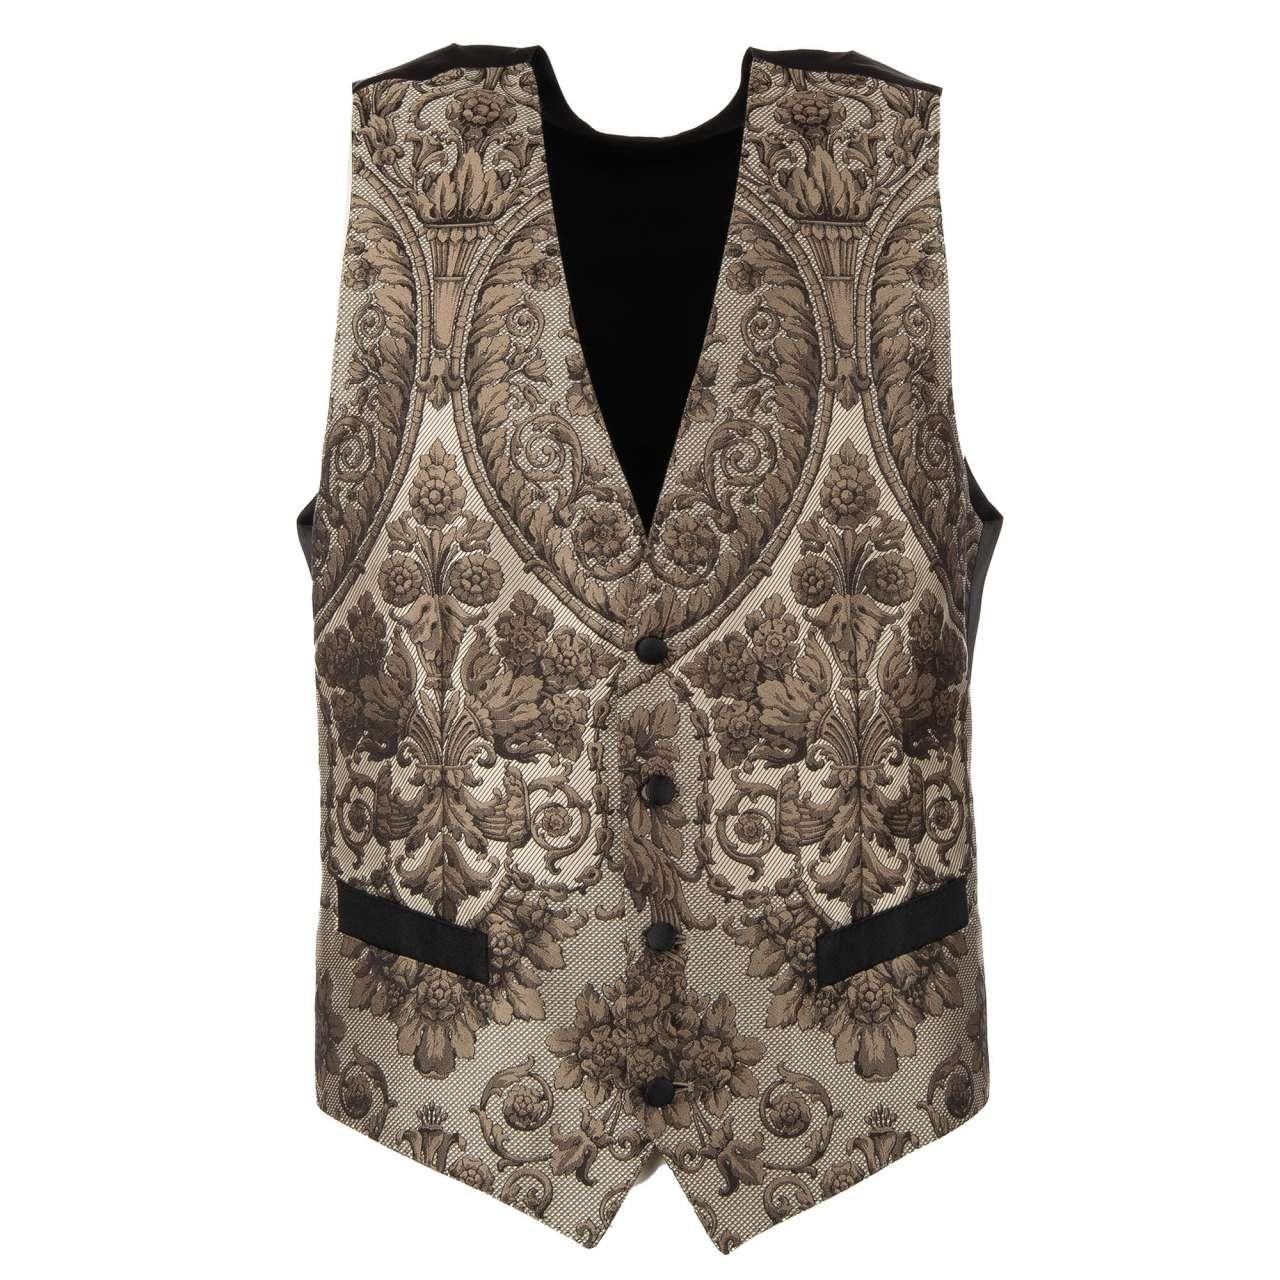 - Floral Jacquard Baroque blazer with waistcoat in black and beige by DOLCE & GABBANA - Former RRP: EUR 3.875 - MADE IN ITALY - New with Tag - Slim Fit - Model: GK9TMT-HJMC3-S8350 - Material: 91% Polyester, 9% Silk - Lining: 90% Silk, 10% Viscose -